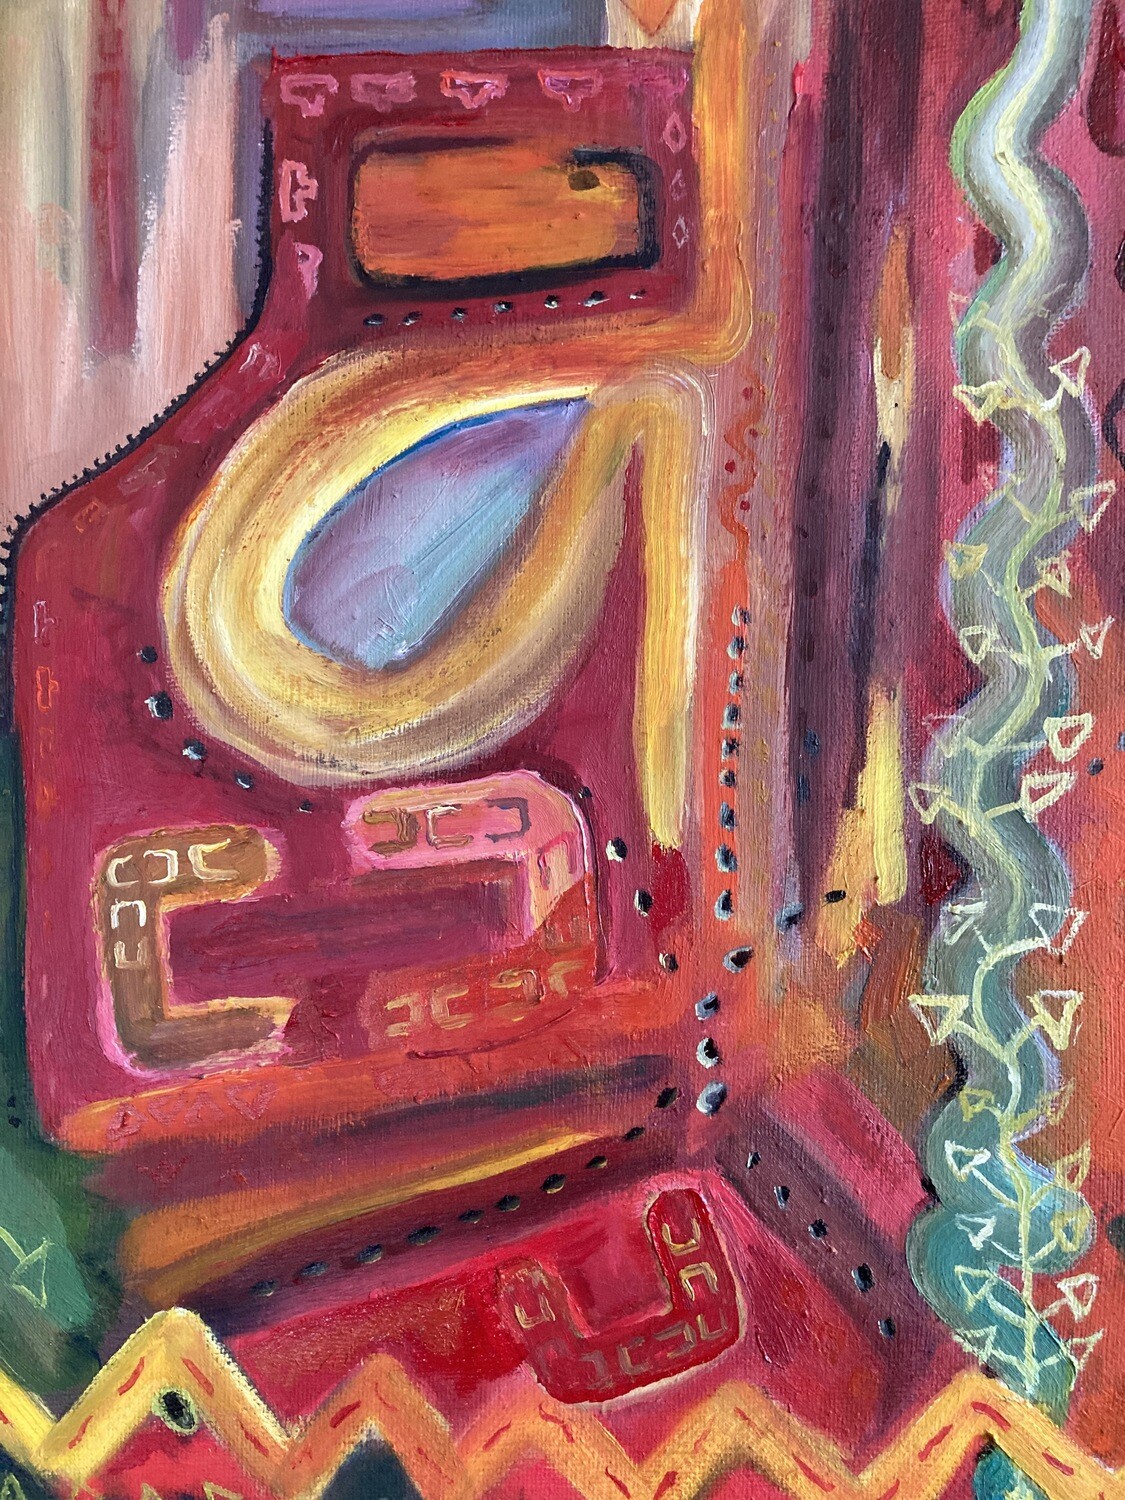 Conversations on a hearth rug 3, oil on canvas